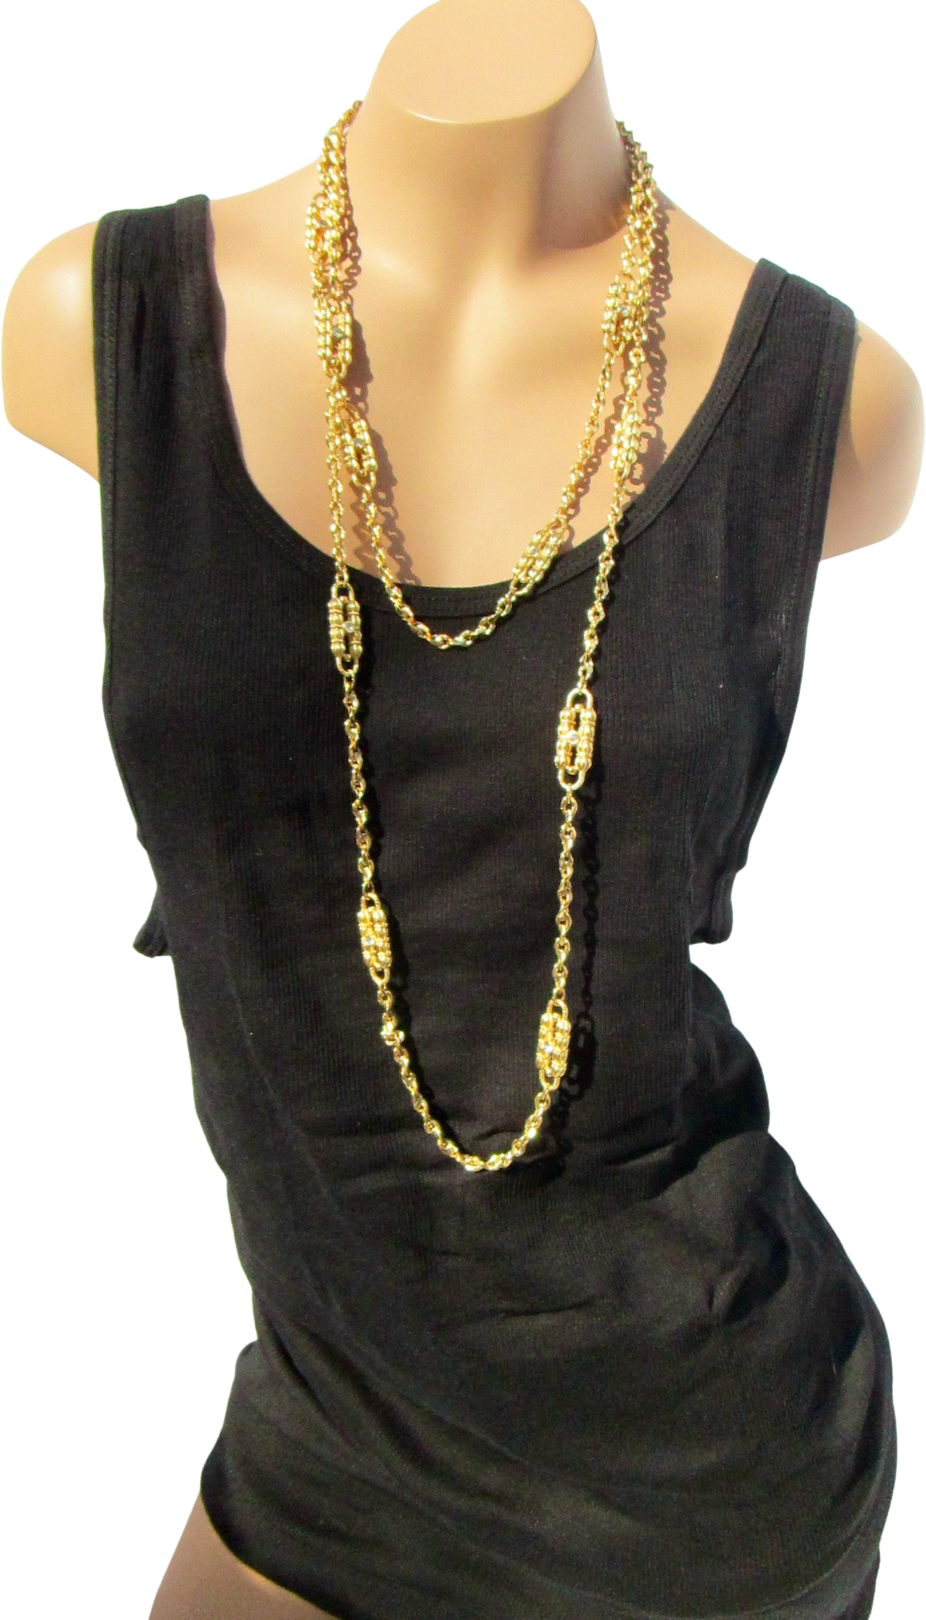 Vintage 80s/90s Jackie Kennedy's Chanel Paperclip Necklace Repro By Jbk /  Camr